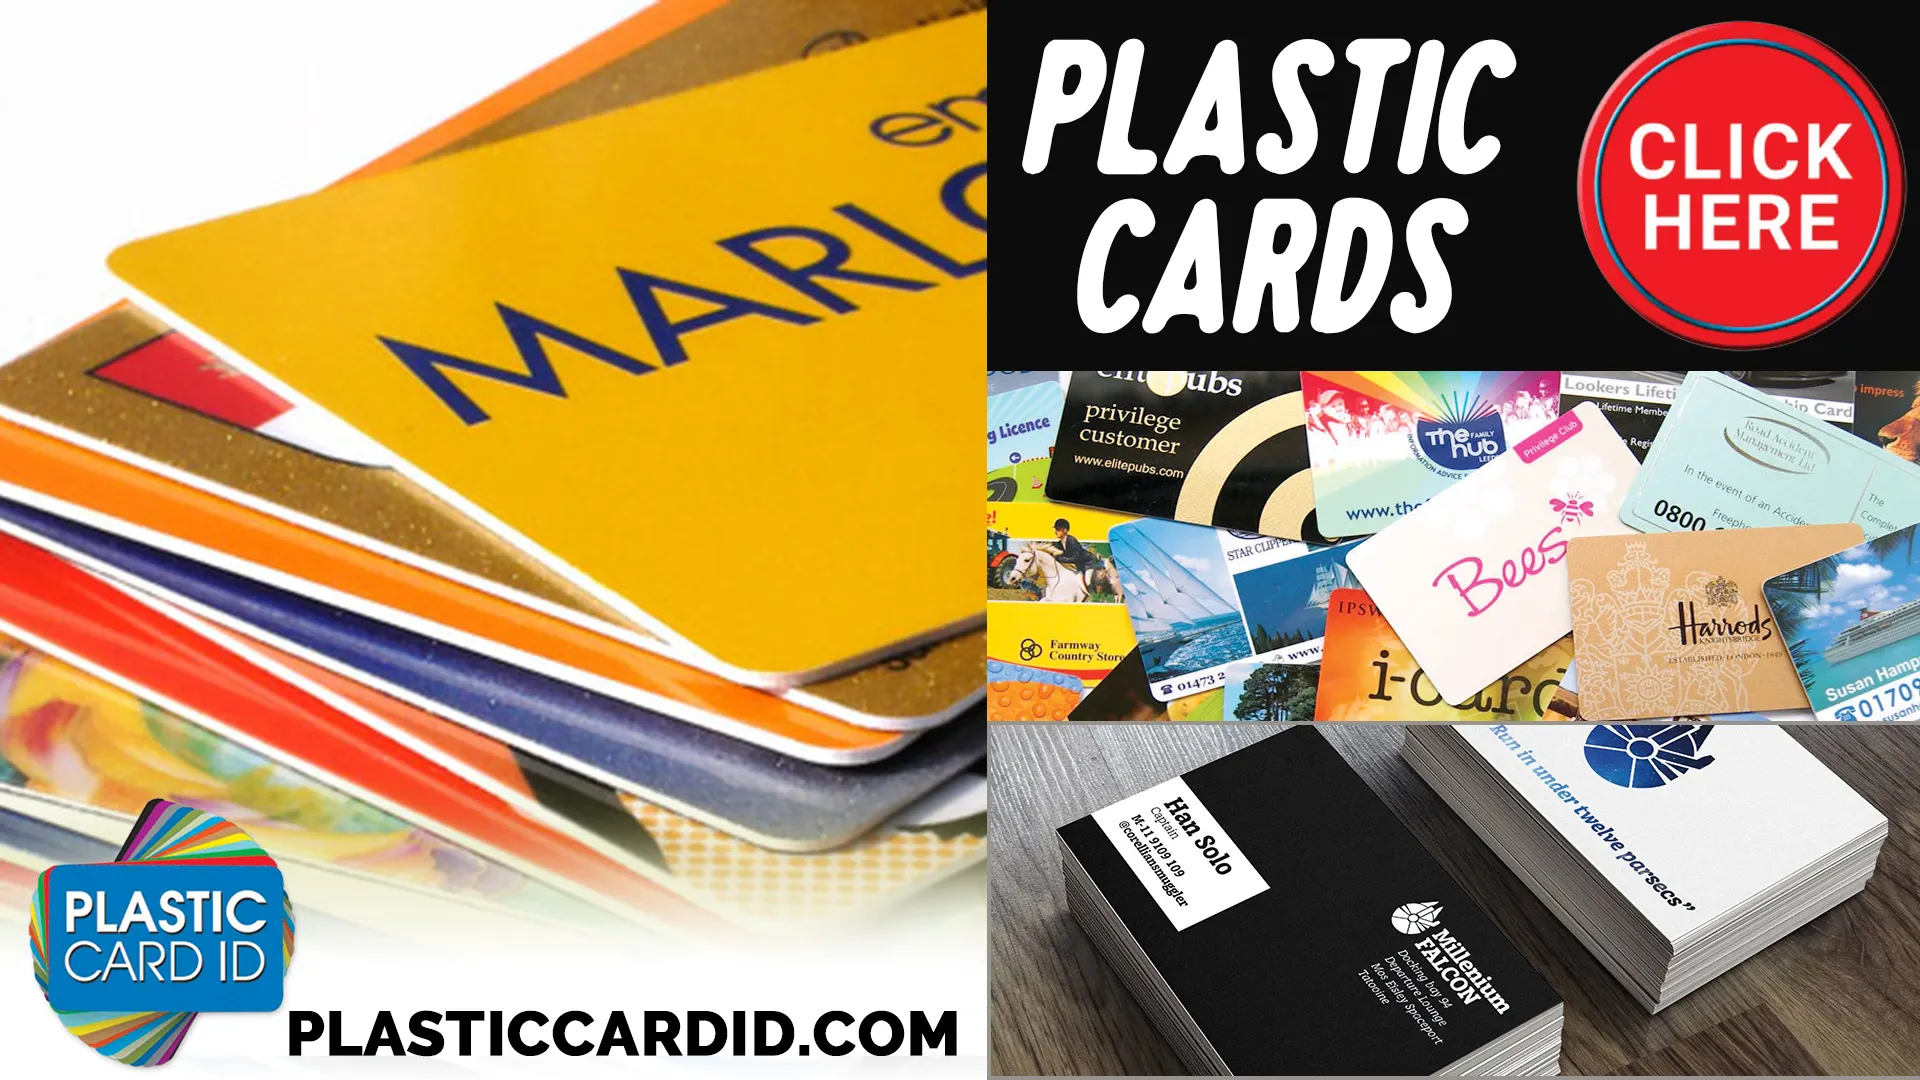 Finding the Right Plastic Card Printer is Easy